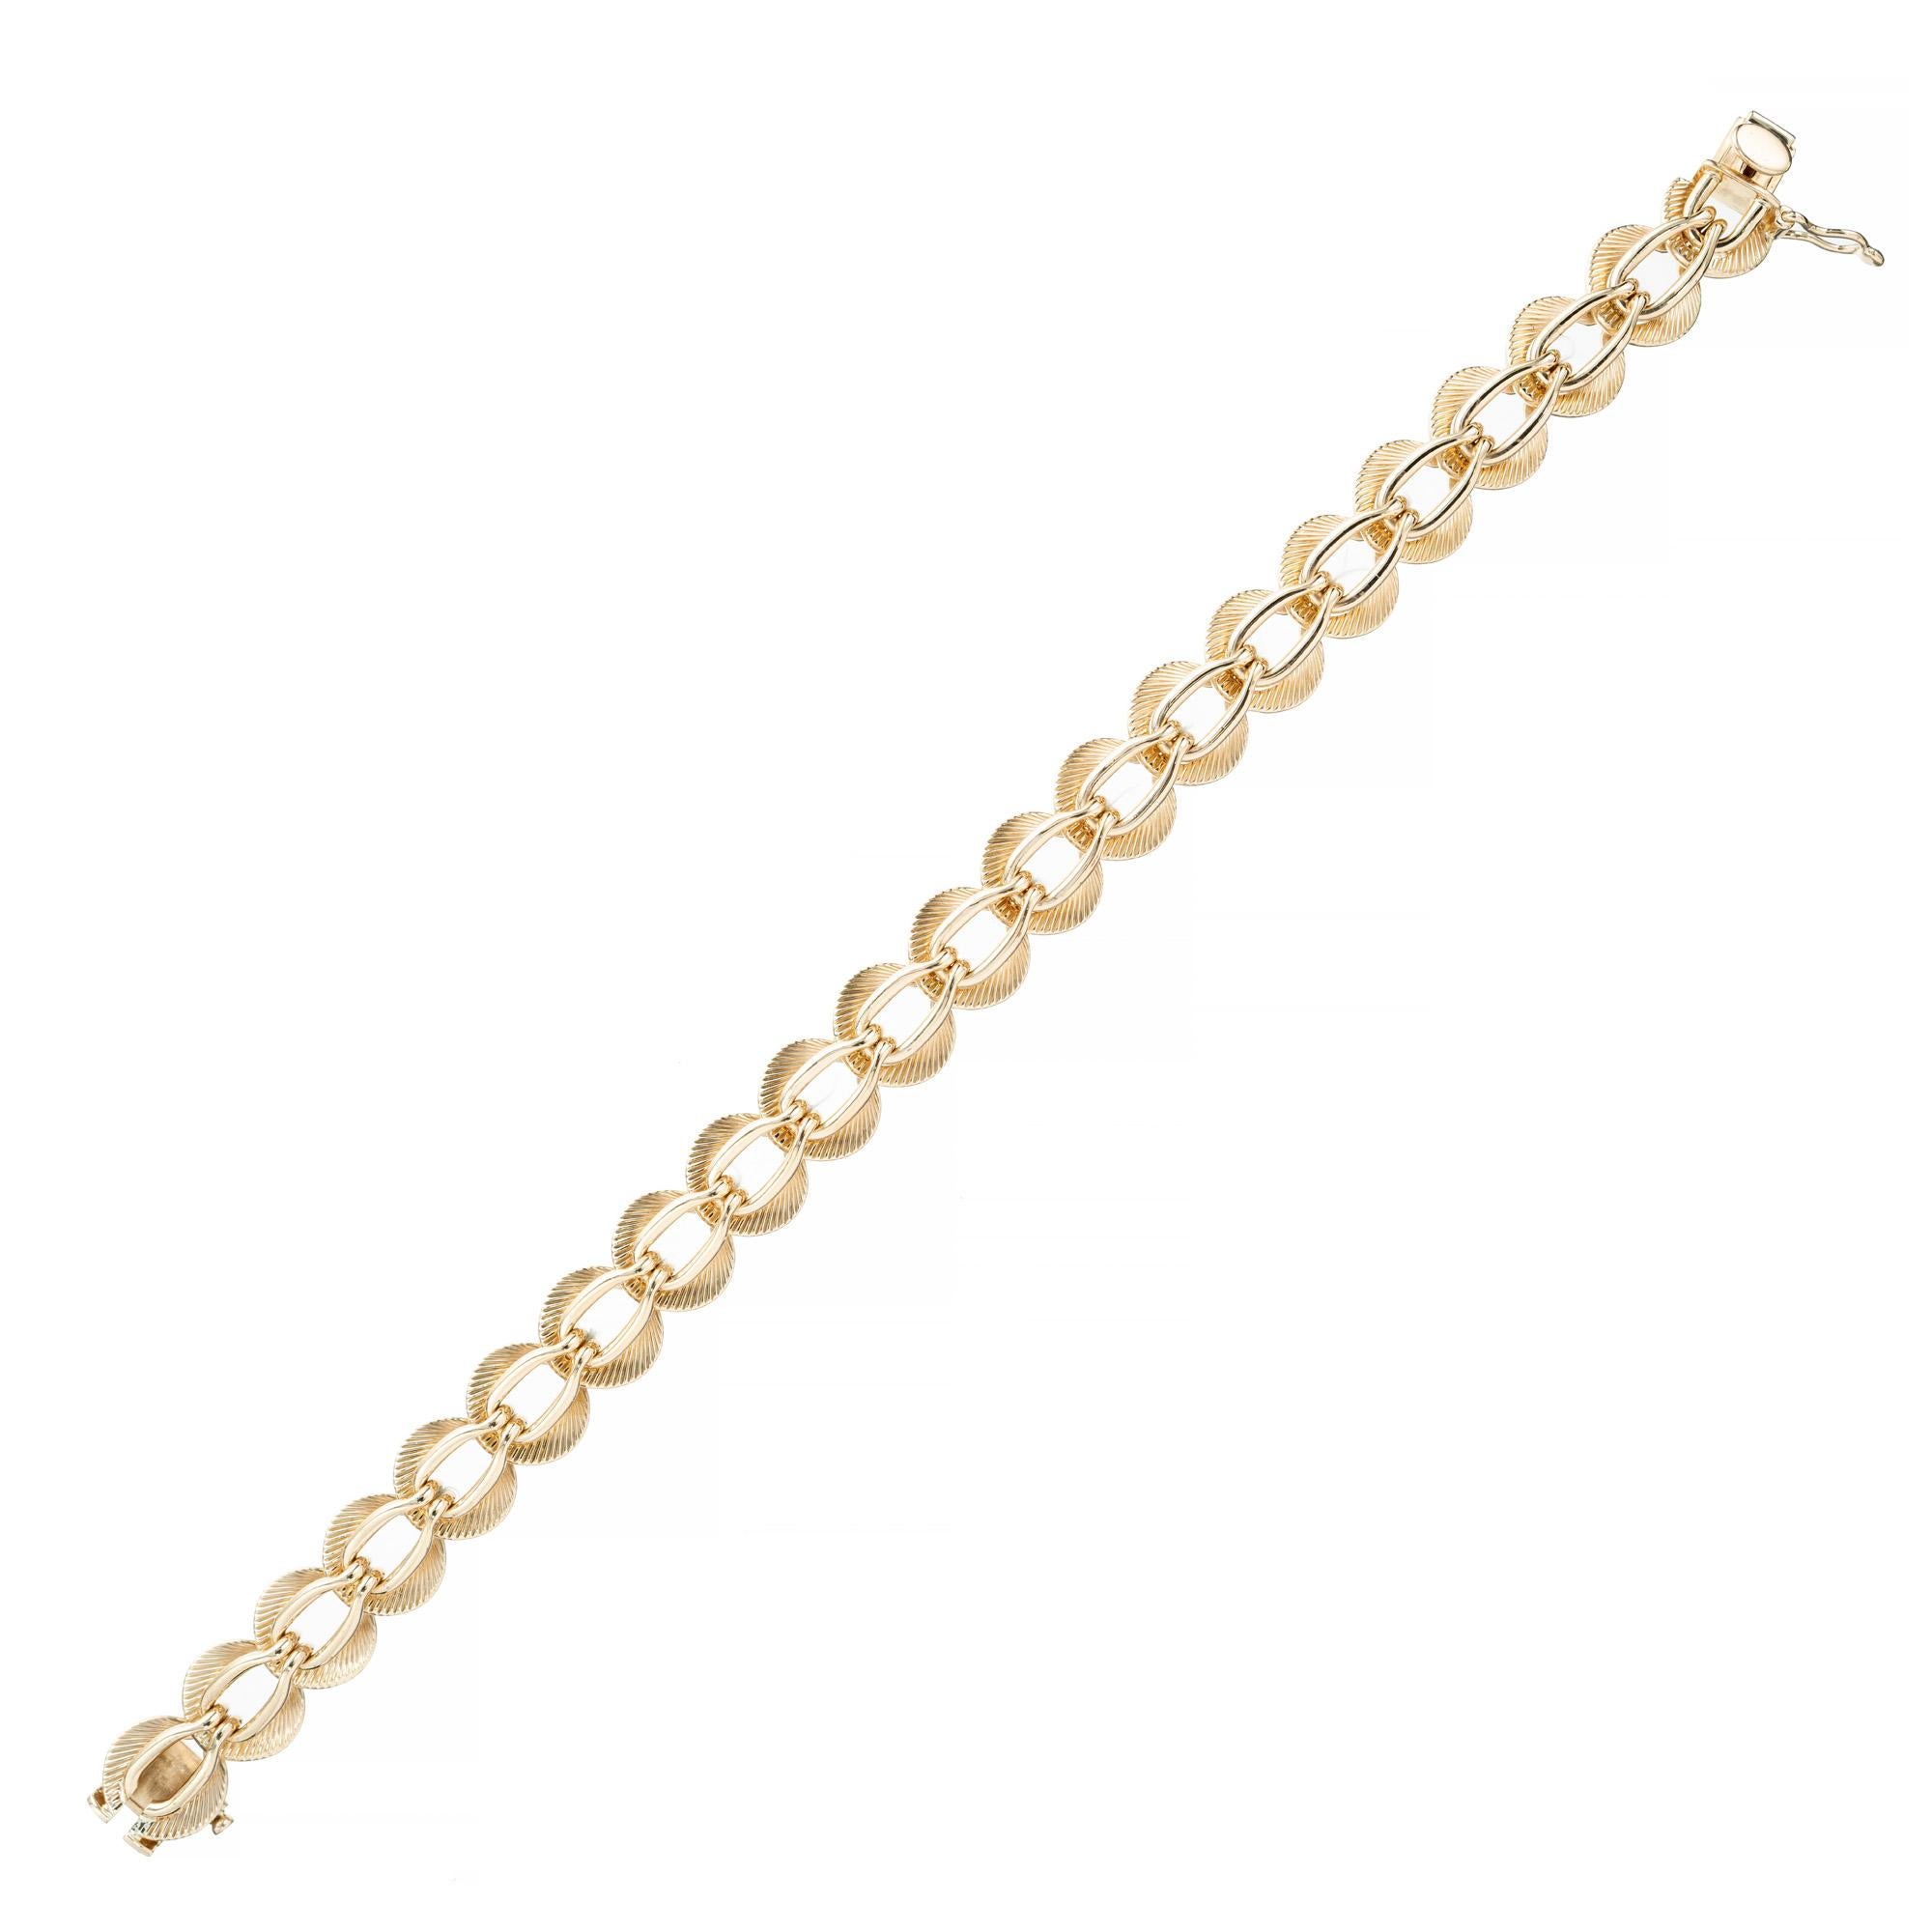 Vintage 1960's solid 14k yellow gold fancy link bracelet by Tiffany & Co.. This mid-century timeless design, features a series of intricate and interlocking oval fancy links, with fan design, that creates a captivating visual effect. Each link is